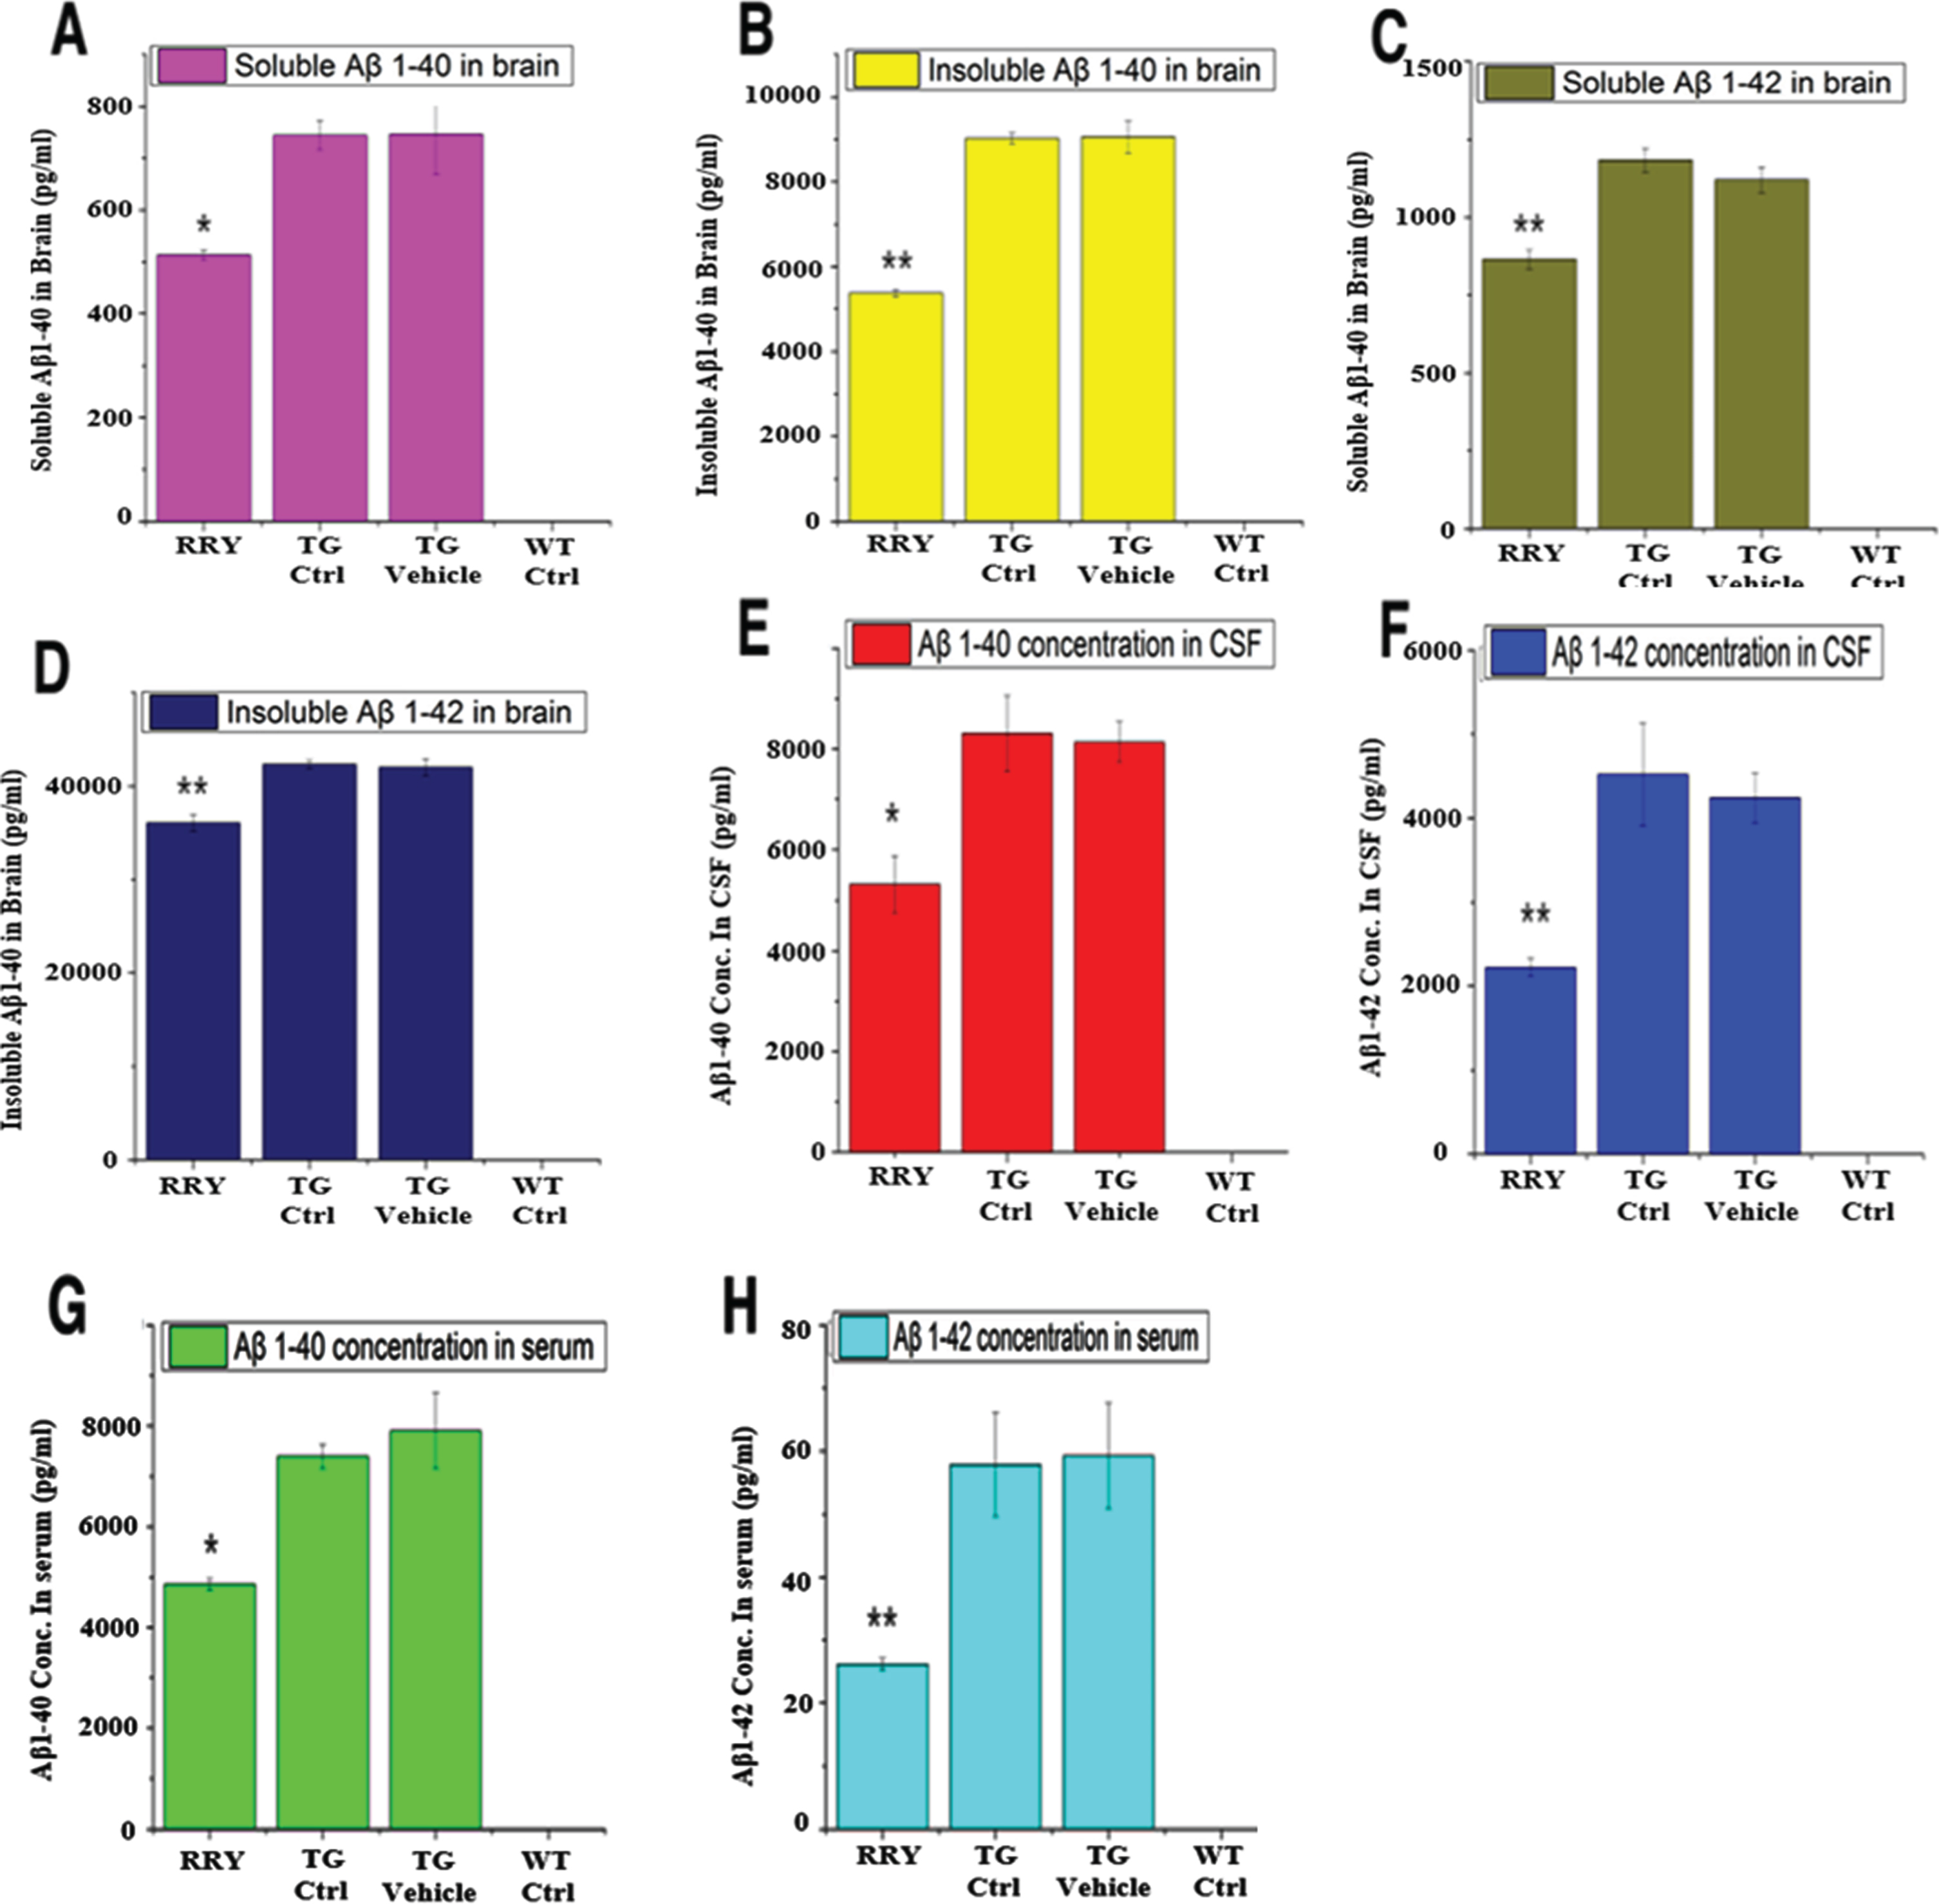 The reversal effect of RRY on levels of Aβ1–42 in the brain, CSF and the serum of the APP/PS1 transgenic mice. A decrease in the total levels of insoluble Aβ1–40 (B)/Aβ1–42 (D) and soluble Aβ1–40 (A)/Aβ1–42 (C) in the brain of the APP/PS1 Tg mice after RRY administration is observed compare to the Tg Ctrl and Tg Vehicle groups. And reductions of Aβ1–40/Aβ1–42 levels in the CSF (E, F) and serum (G, H) were also observed in the RRY-treated group. The data are expressed as the means±SEM (n = 8, *p < 0.05; **p < 0.01). The results showed a decrease in Aβ aggregation in the RRY-treated group.